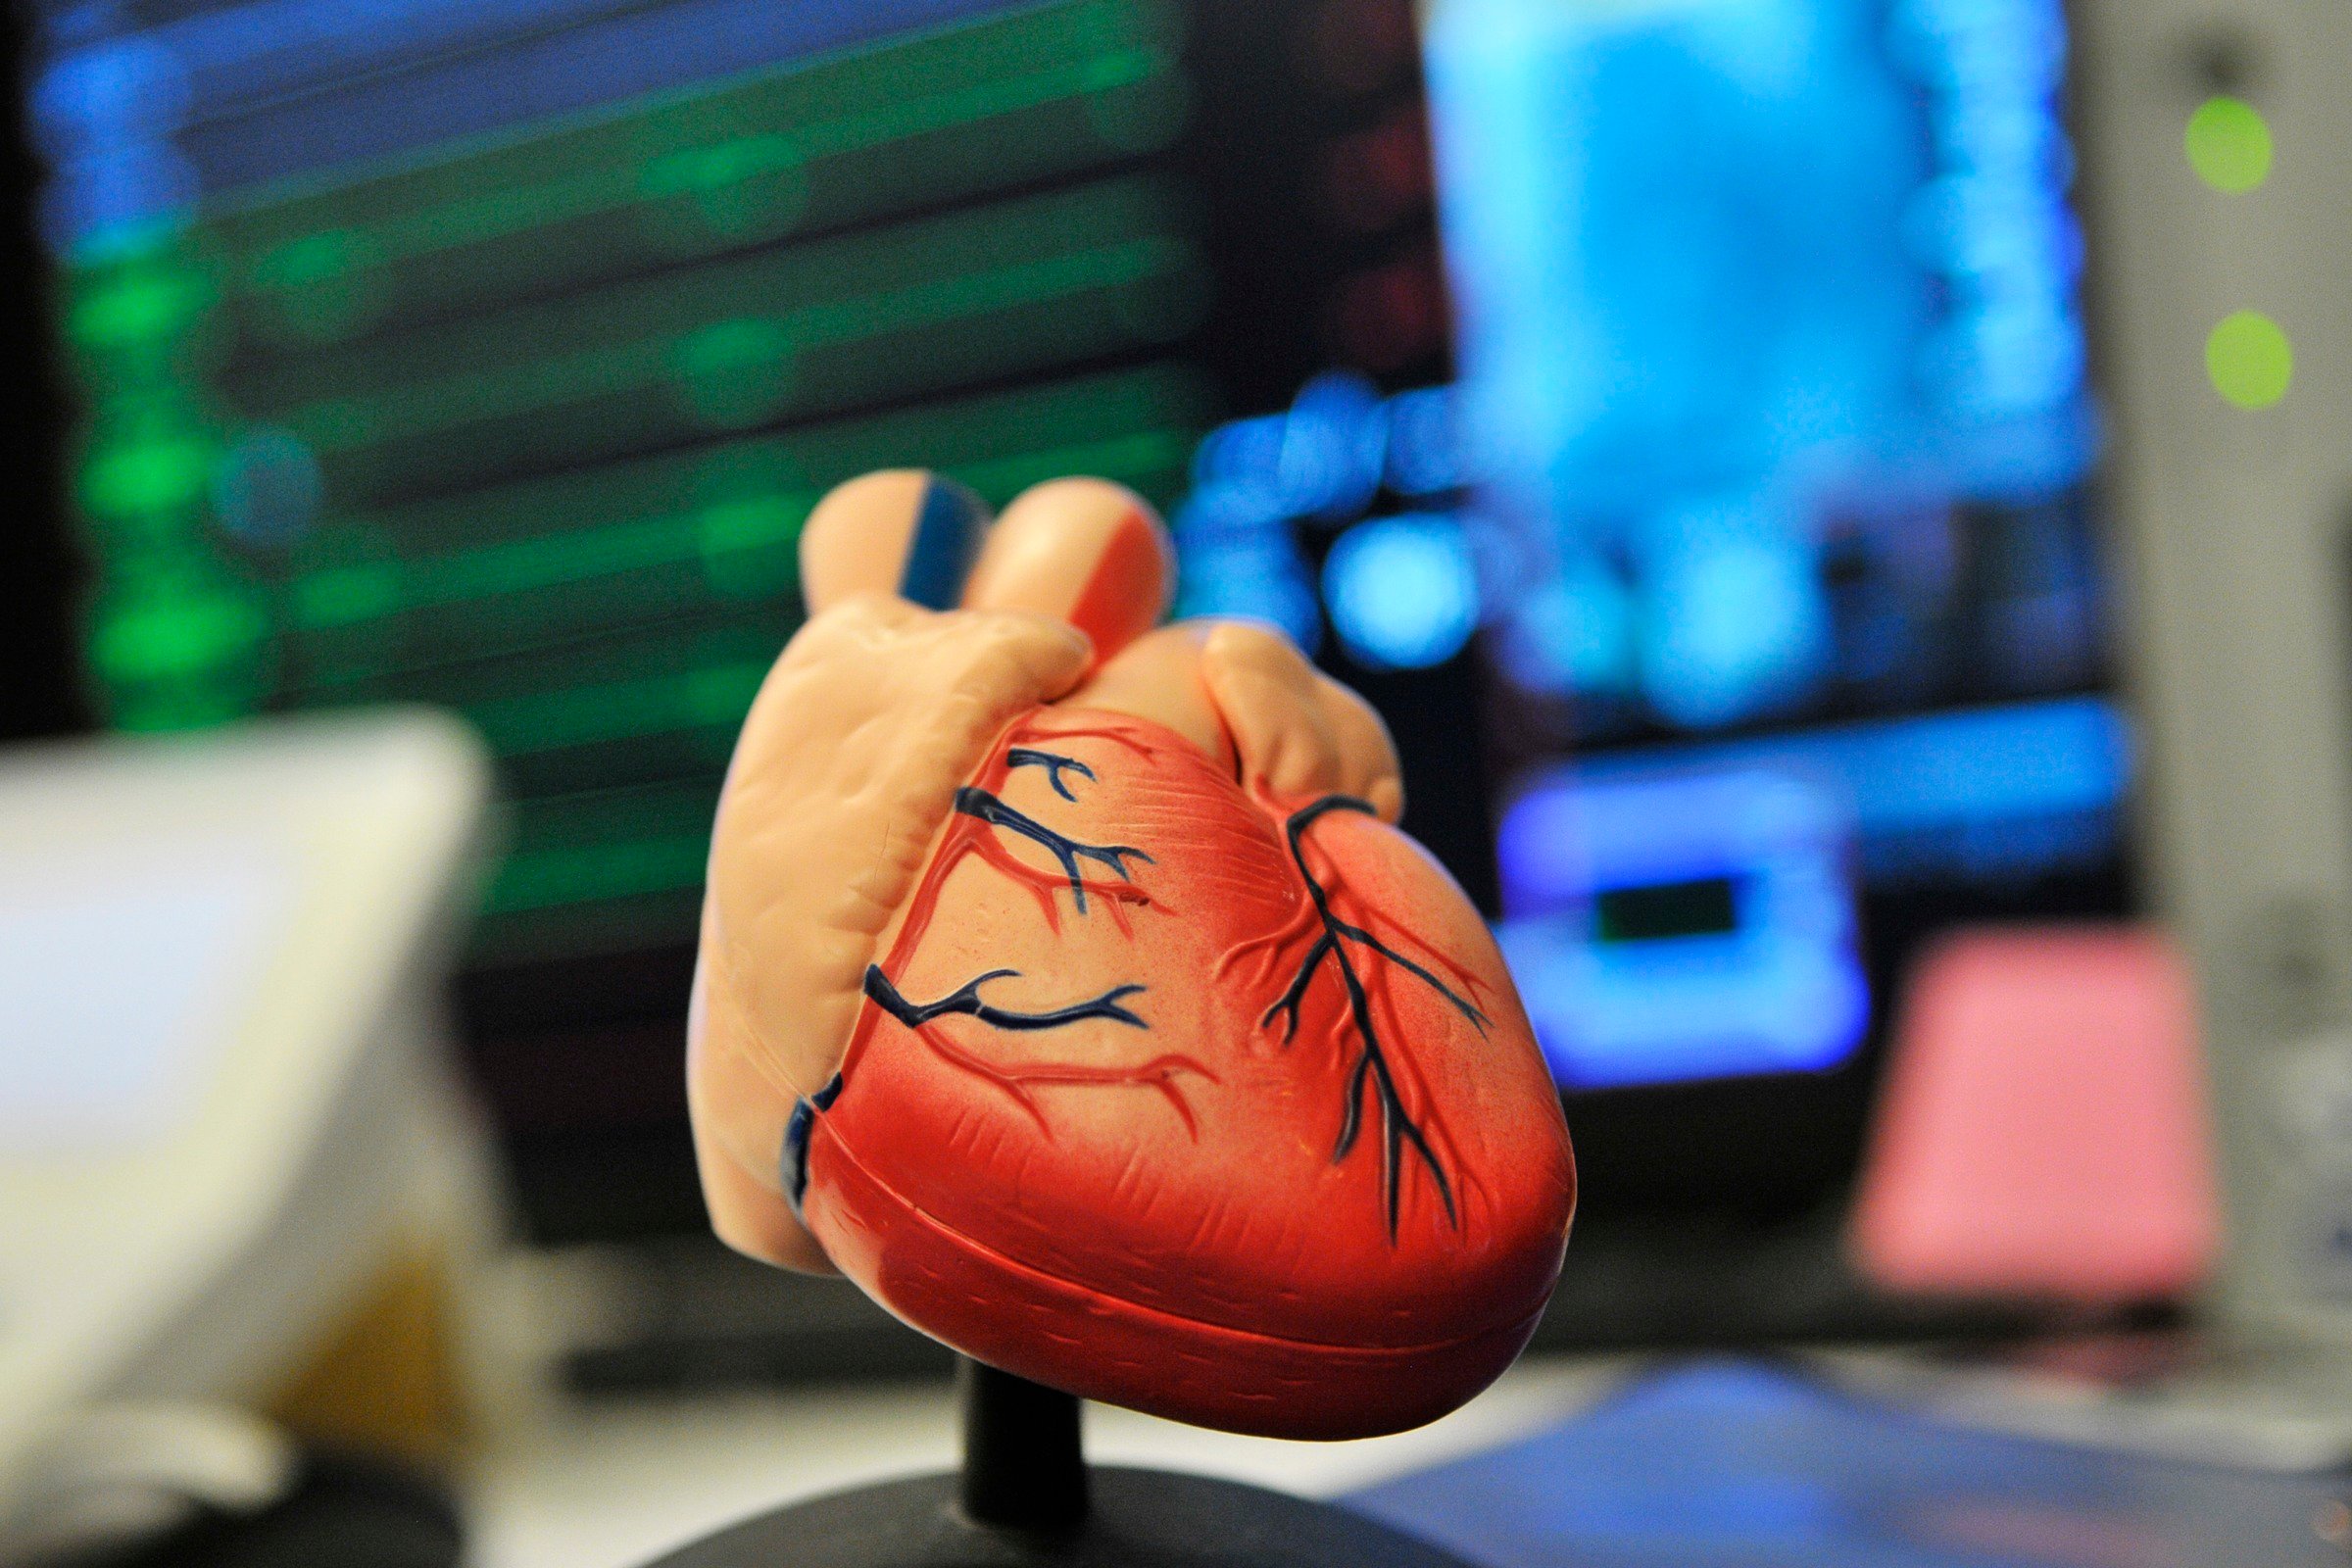 heart model in front of screens